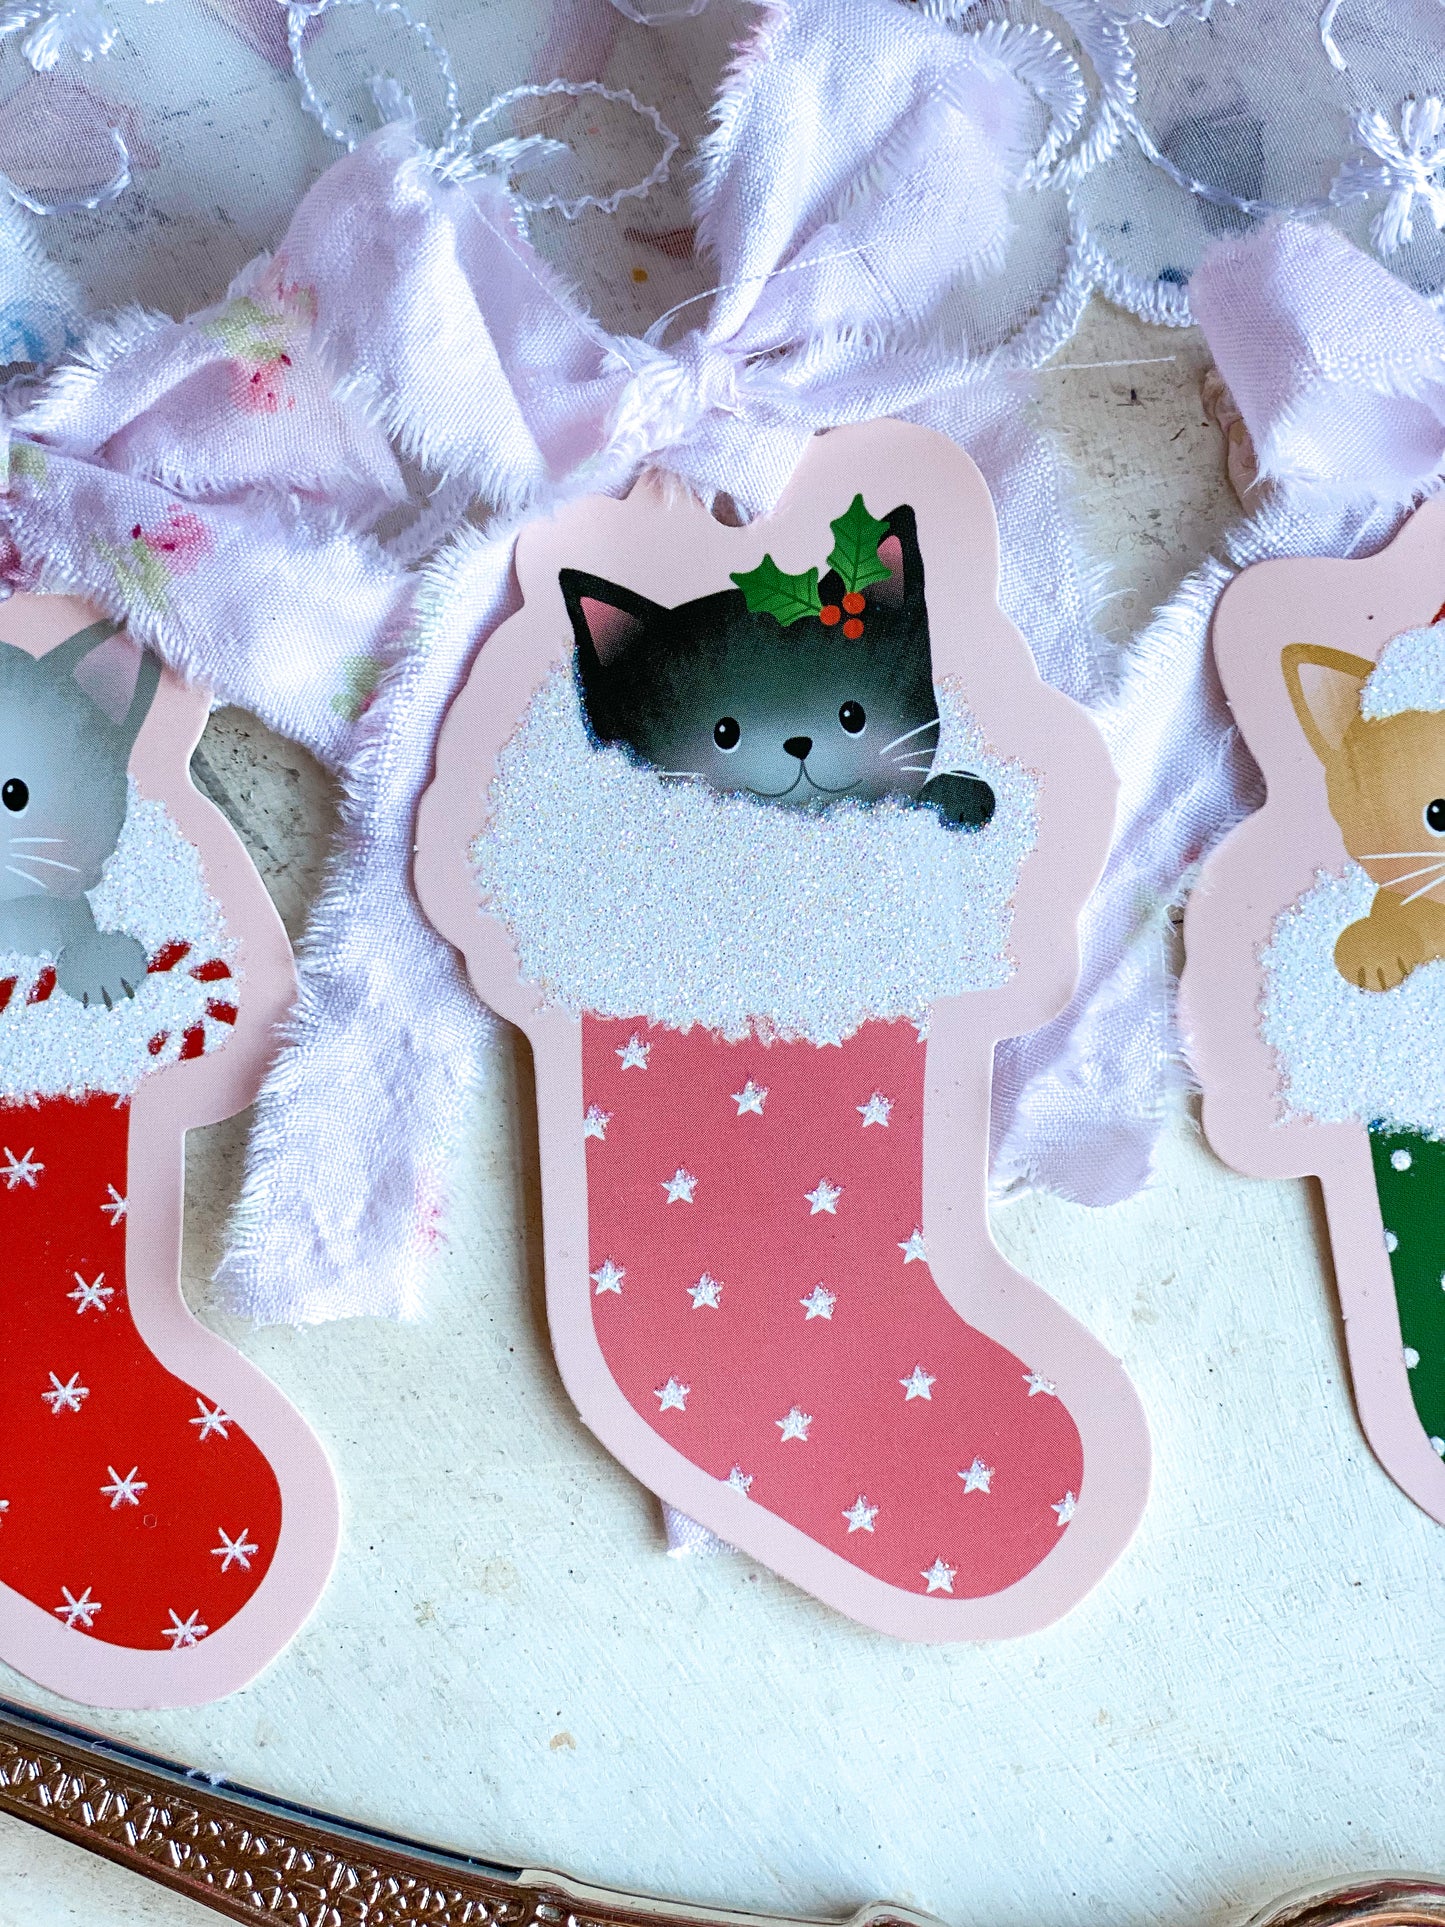 Bespoke Kitty Cat Gift Tags with Shabby Chic ties